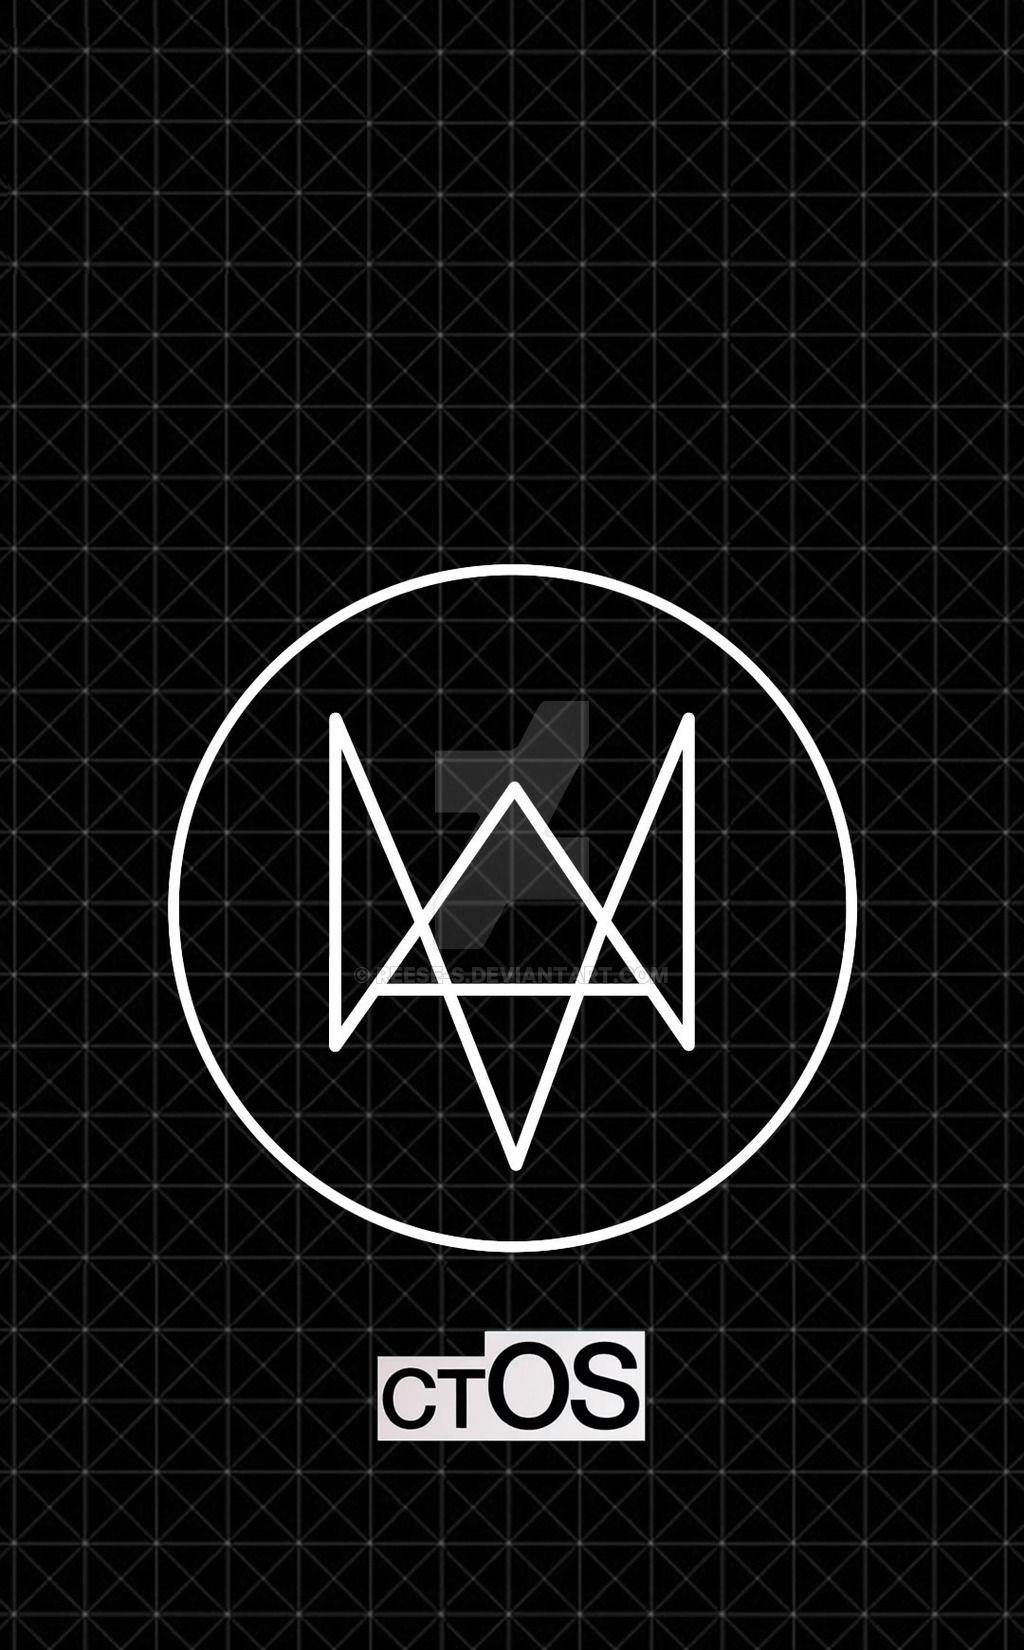 Watch Dogs Iphone Wallpapers Top Free Watch Dogs Iphone Backgrounds Wallpaperaccess